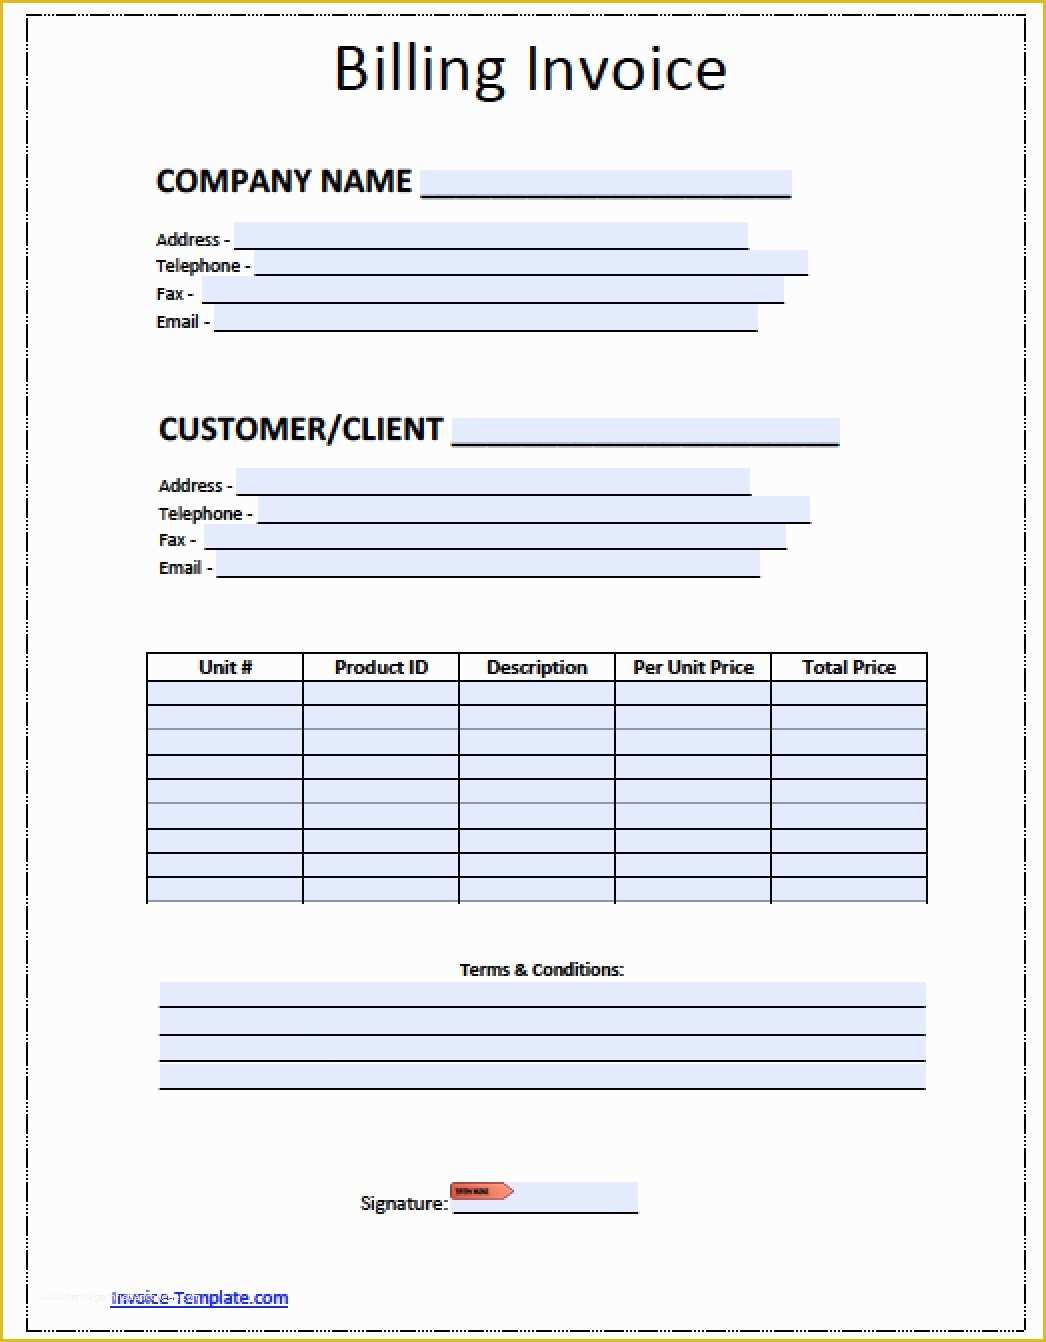 Free Bill Invoice Template Printable Of Billing Invoice Template Download Free Blank Invoice